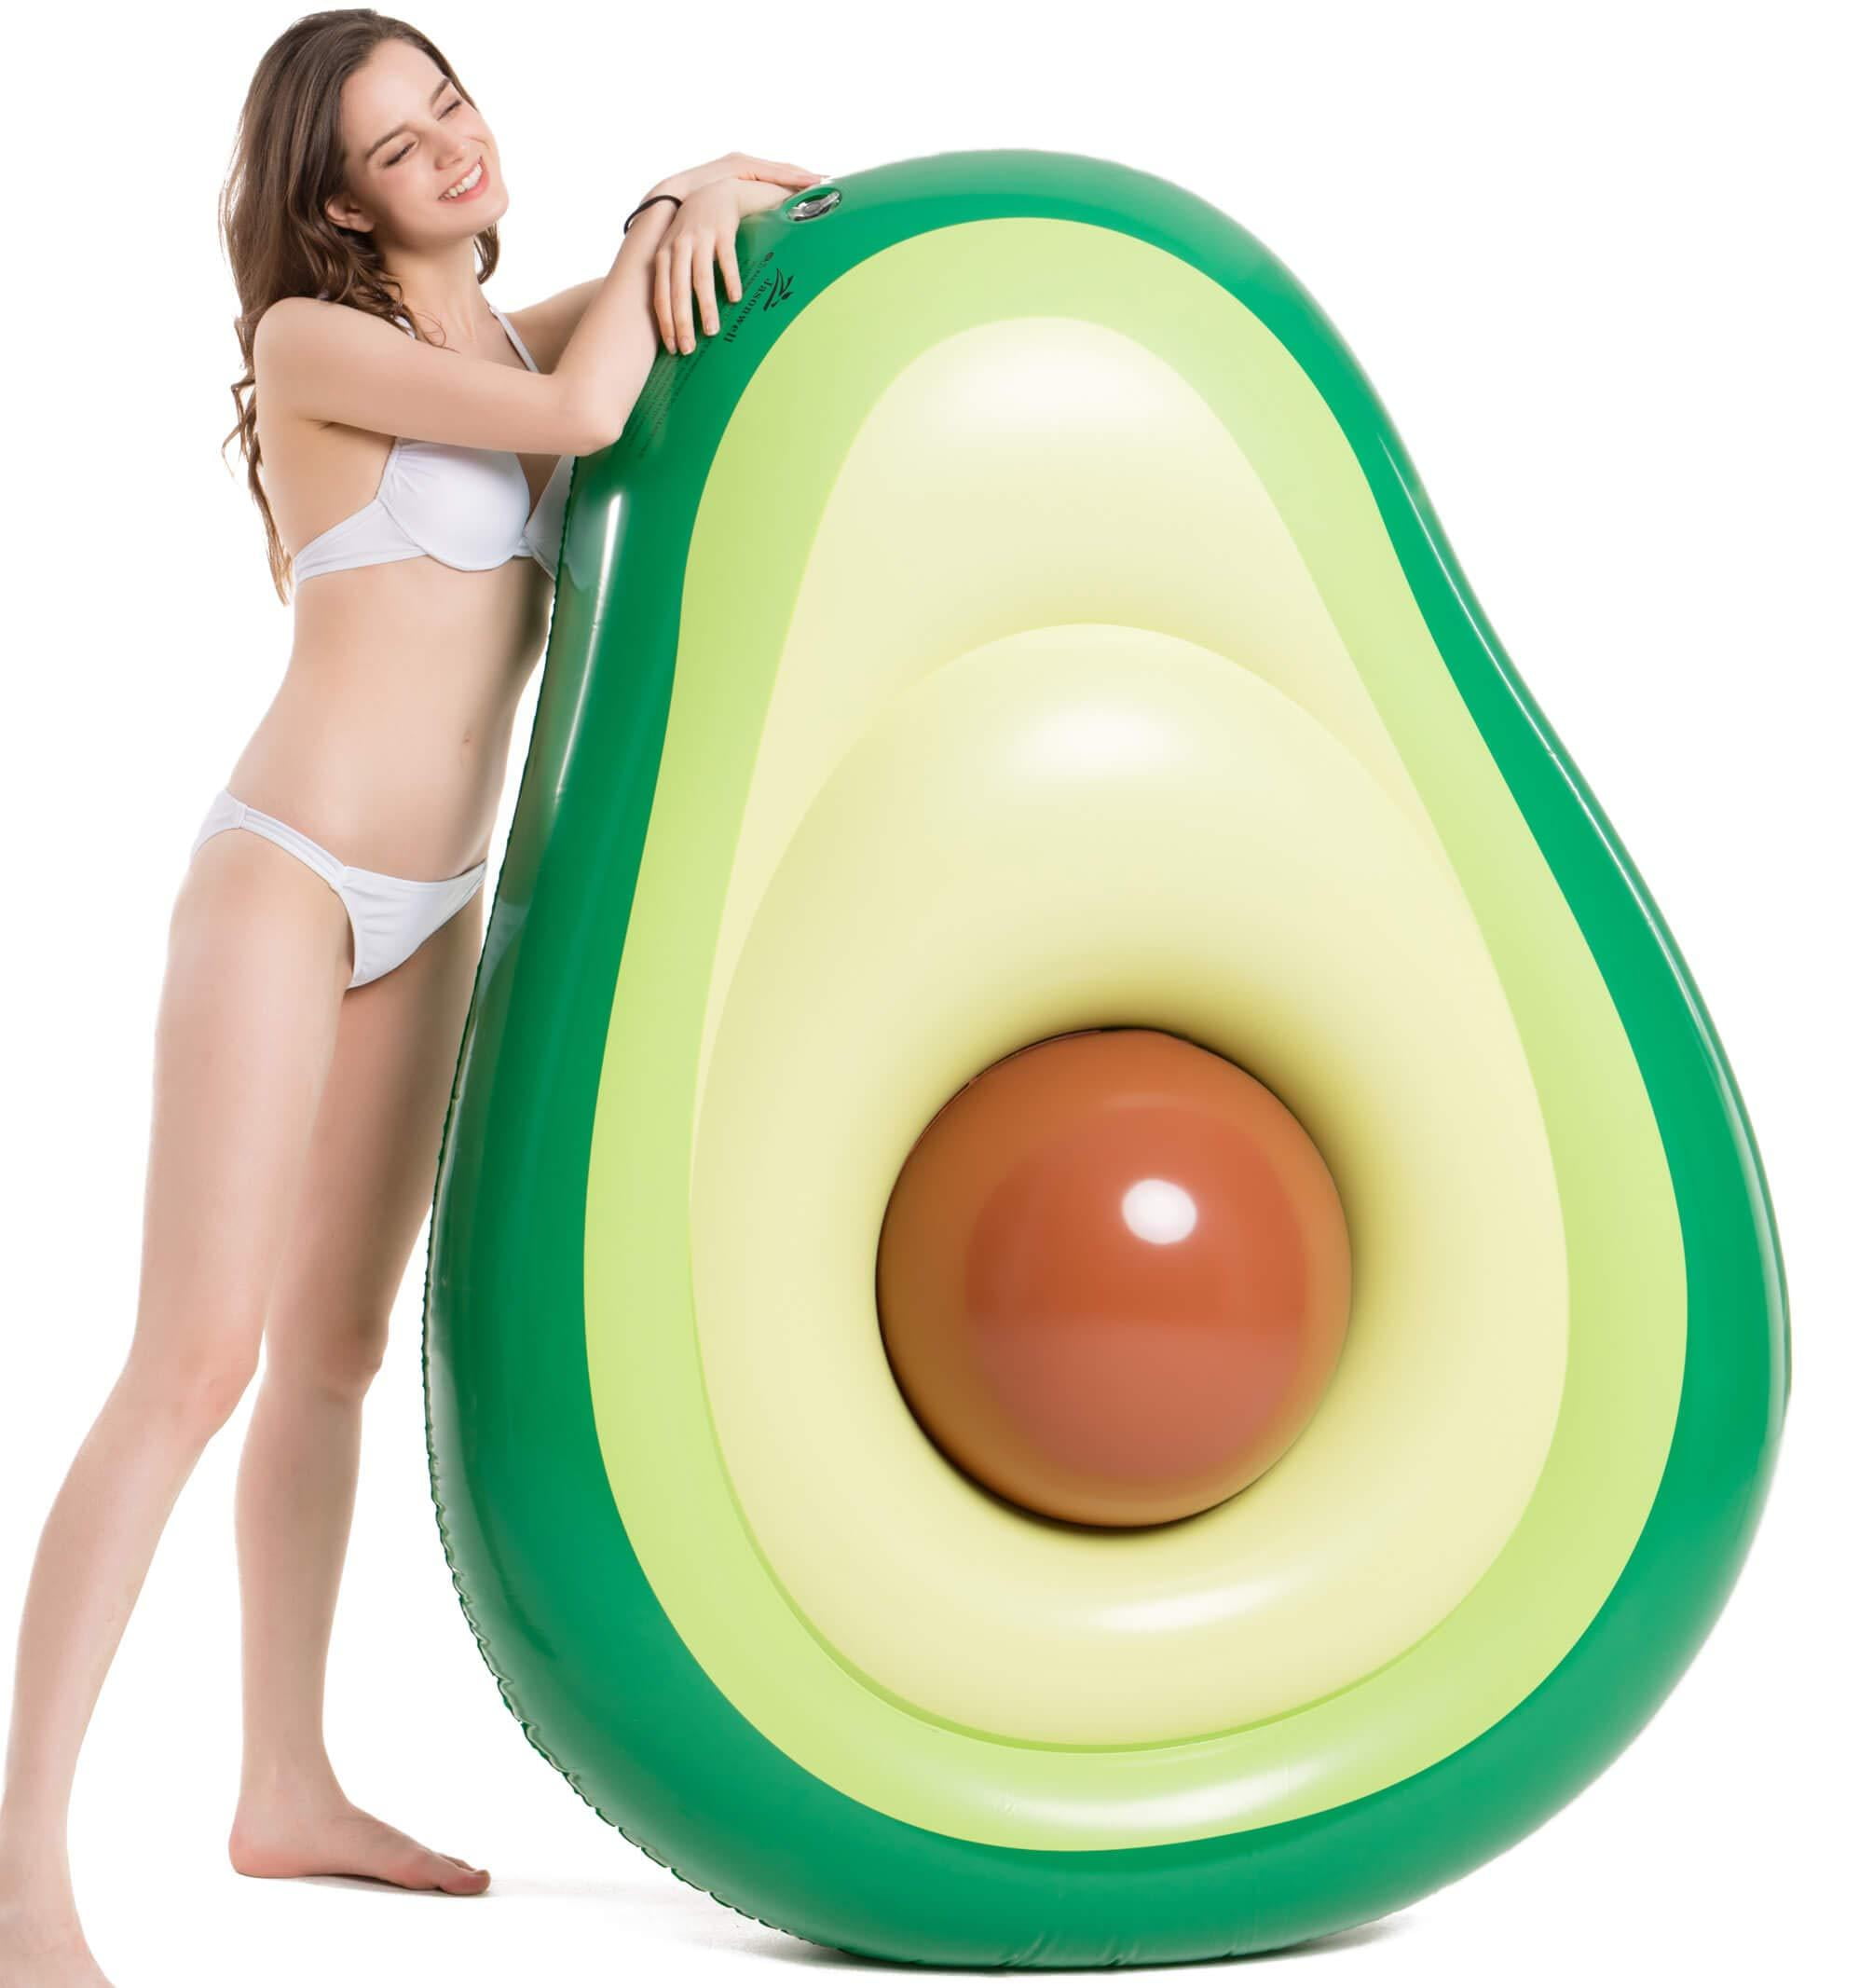 Ideal For Adults /& Children Ages 5 /& Up Waft Inflatable Avocado Pool Float Weight Capacity 150 Kg Pool Floatie With Brown Ball Thick /& Long-Lasting Easy Inflation /& Deflation Great Gift Option